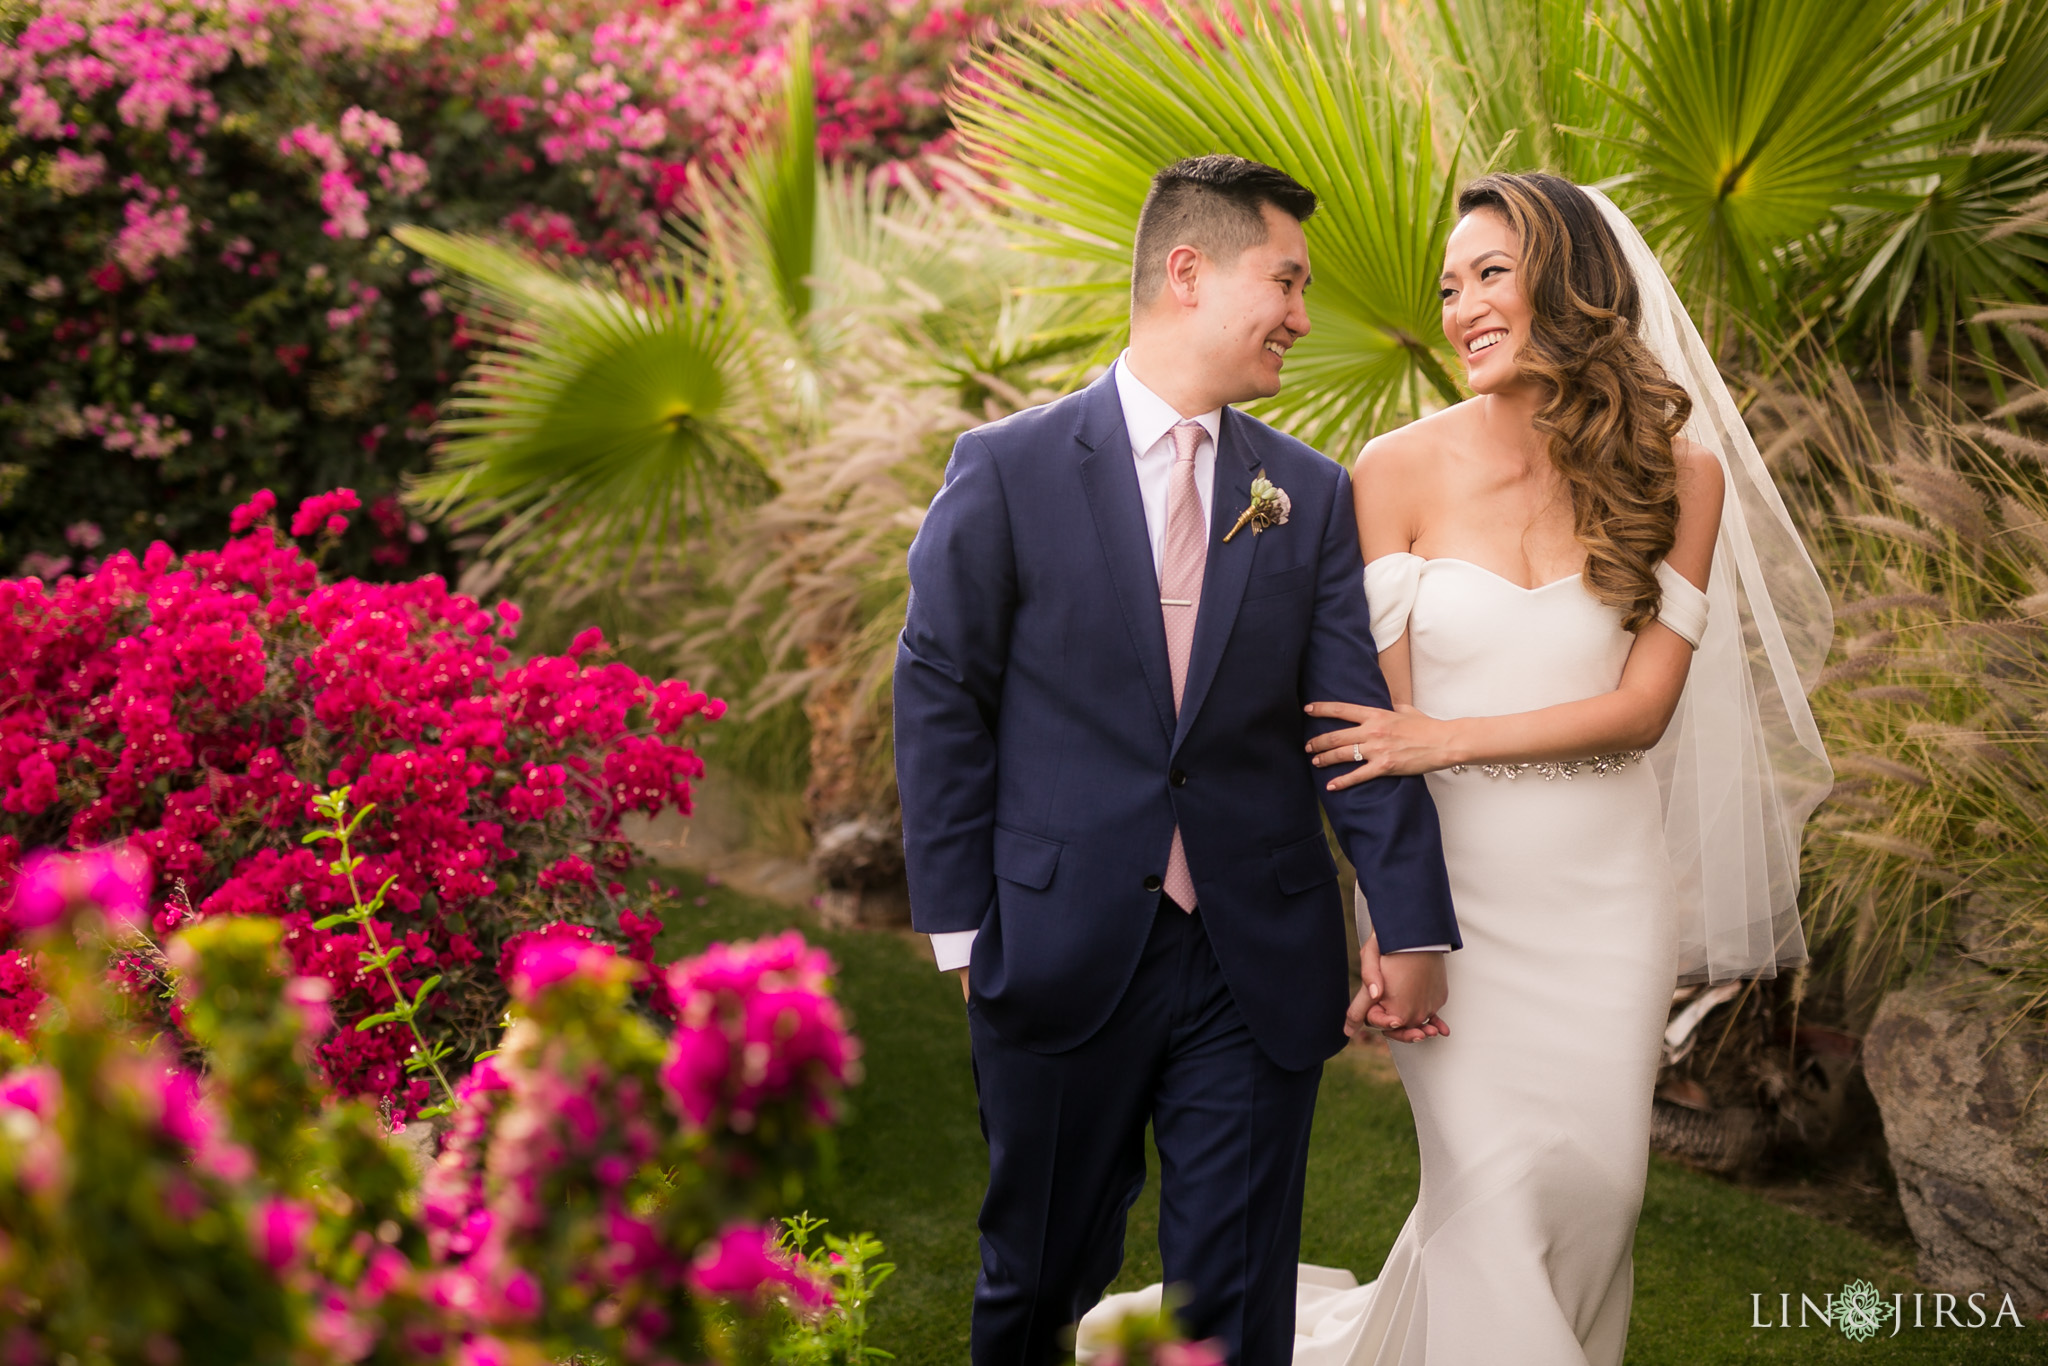 11 odonnell house palm springs wedding photography